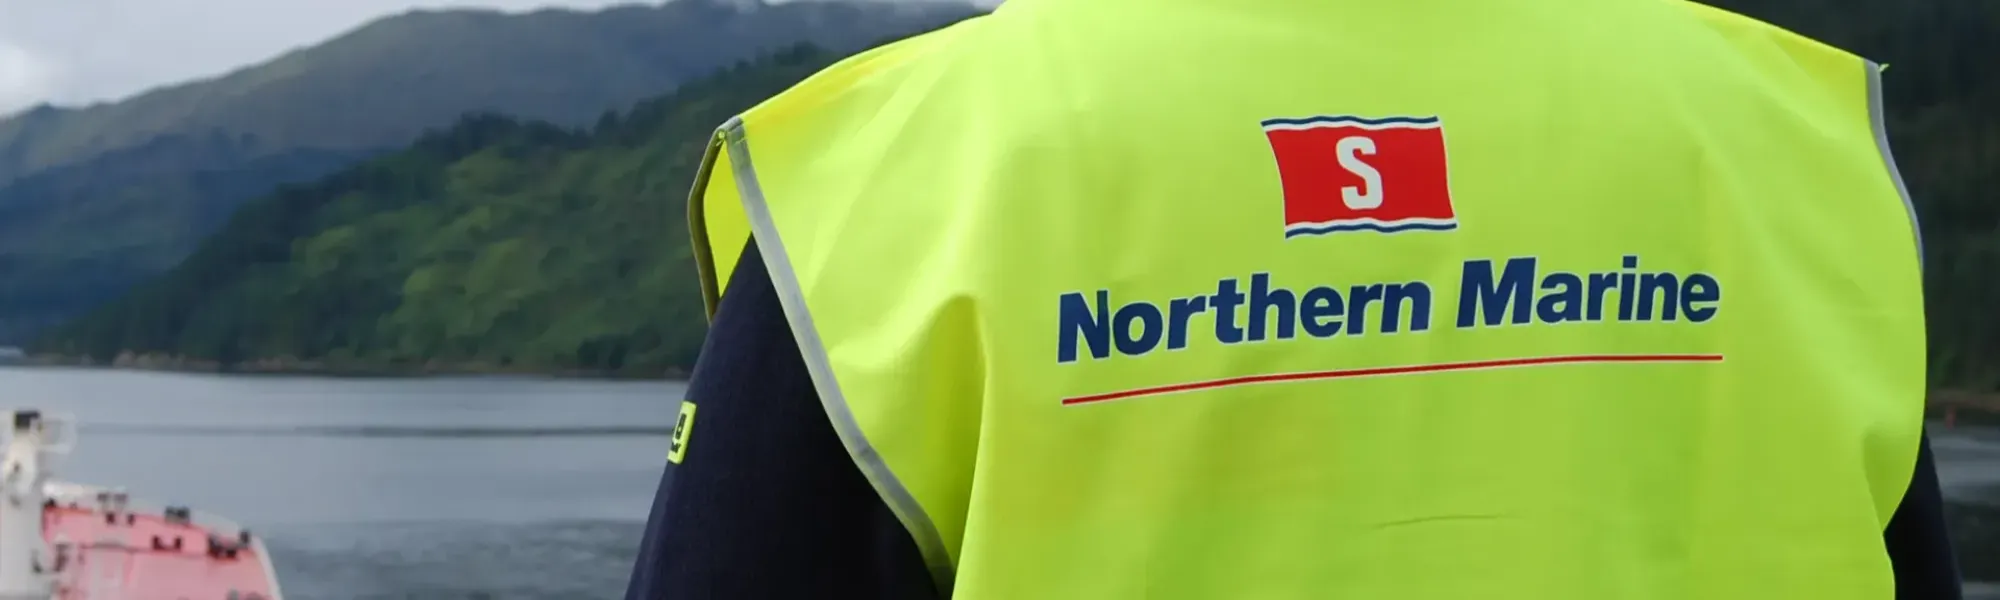 Register your interest in working for Northern Marine